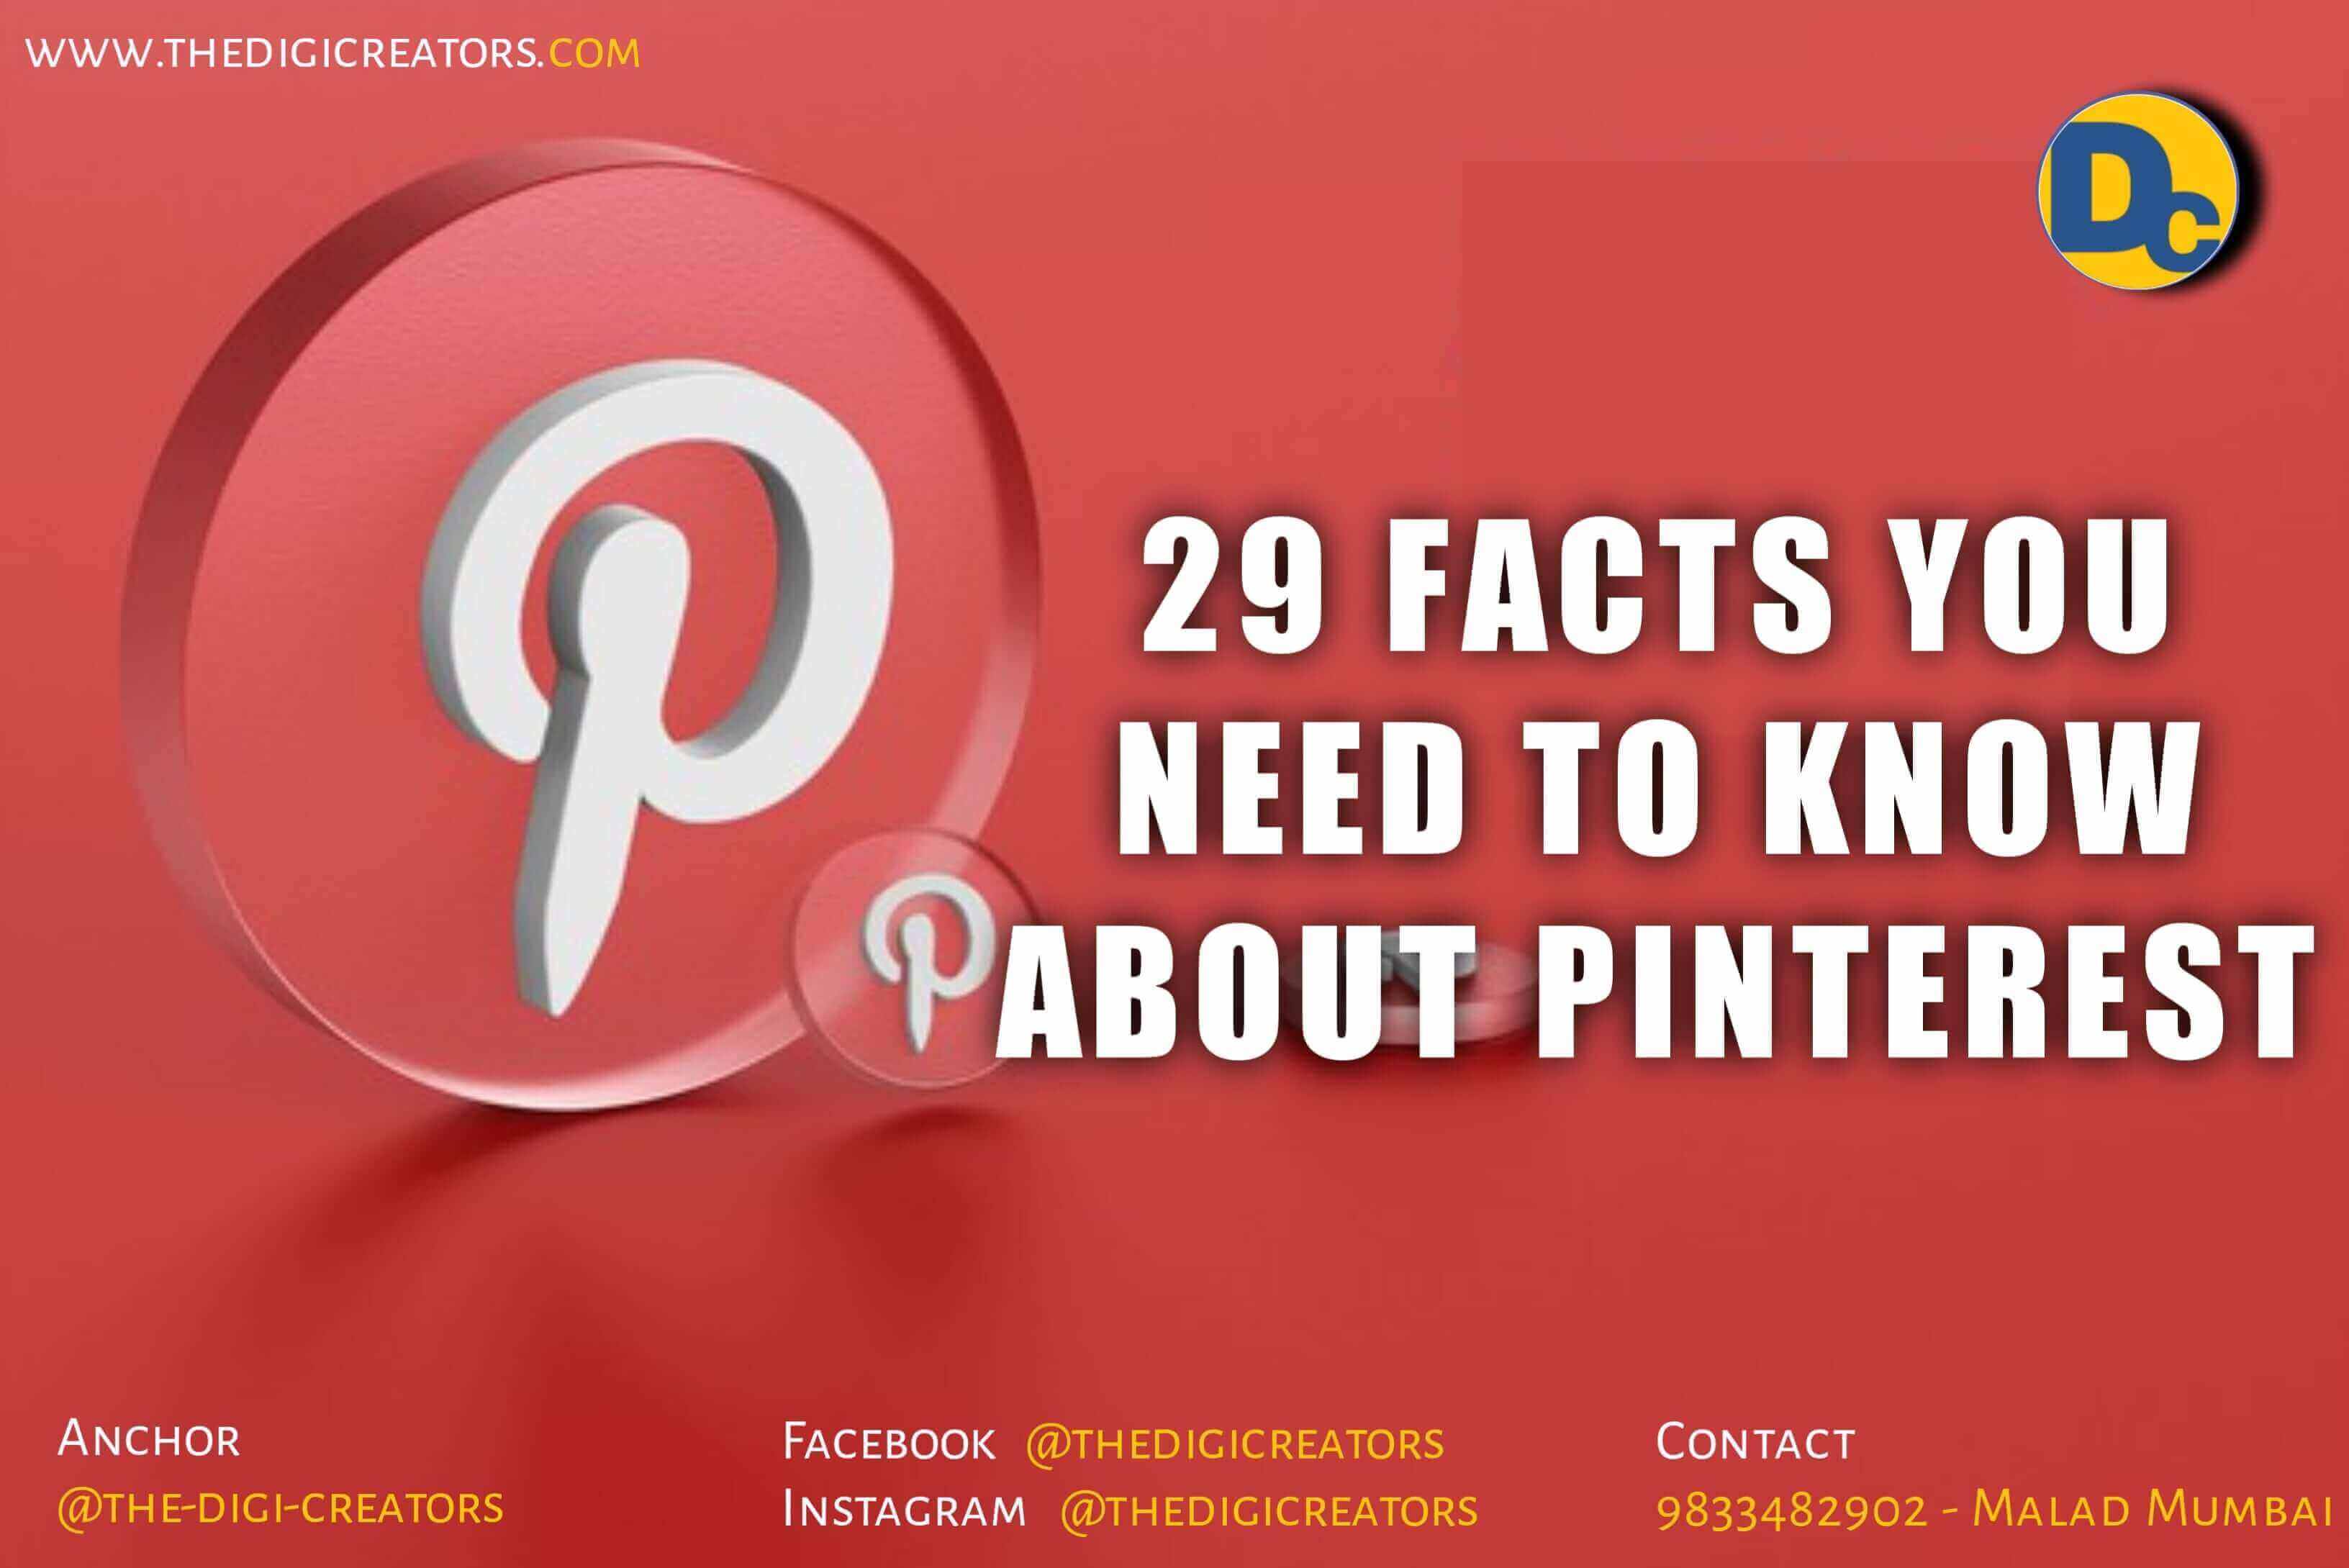 29 Facts You Need to Know About Pinterest